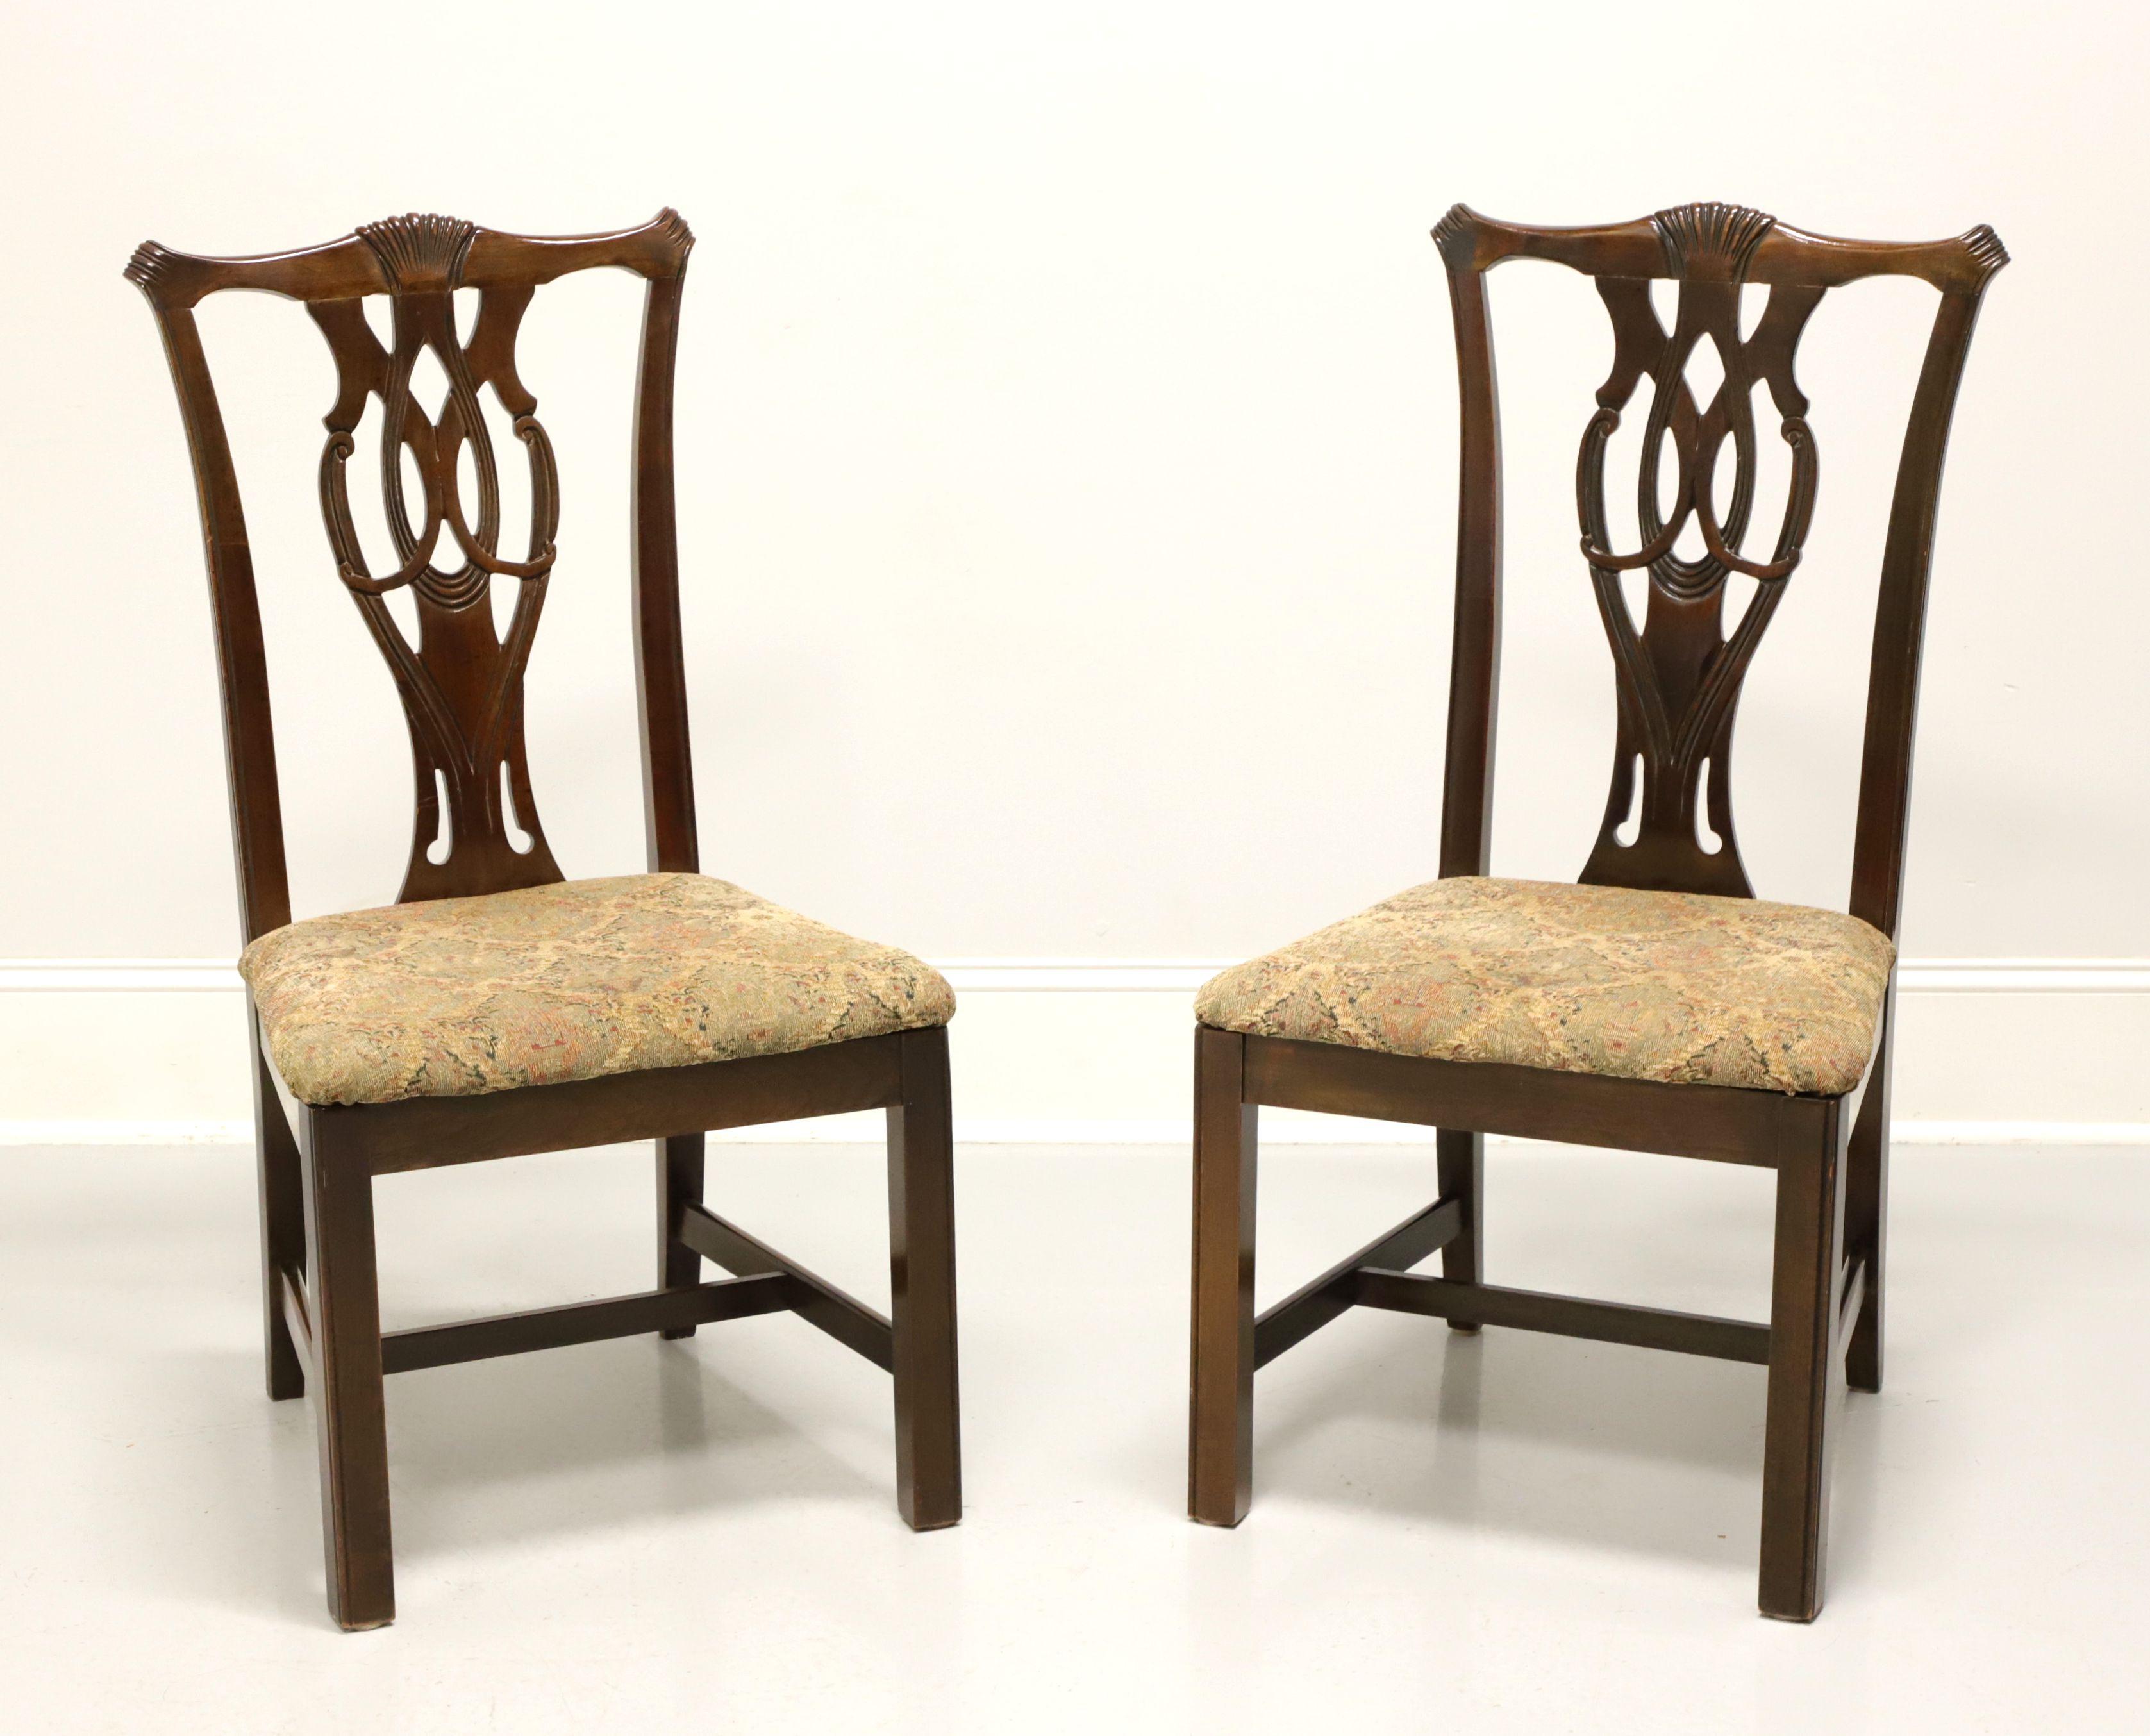 THOMASVILLE Solid Cherry Chippendale Straight Leg Dining Side Chairs - Pair B 4